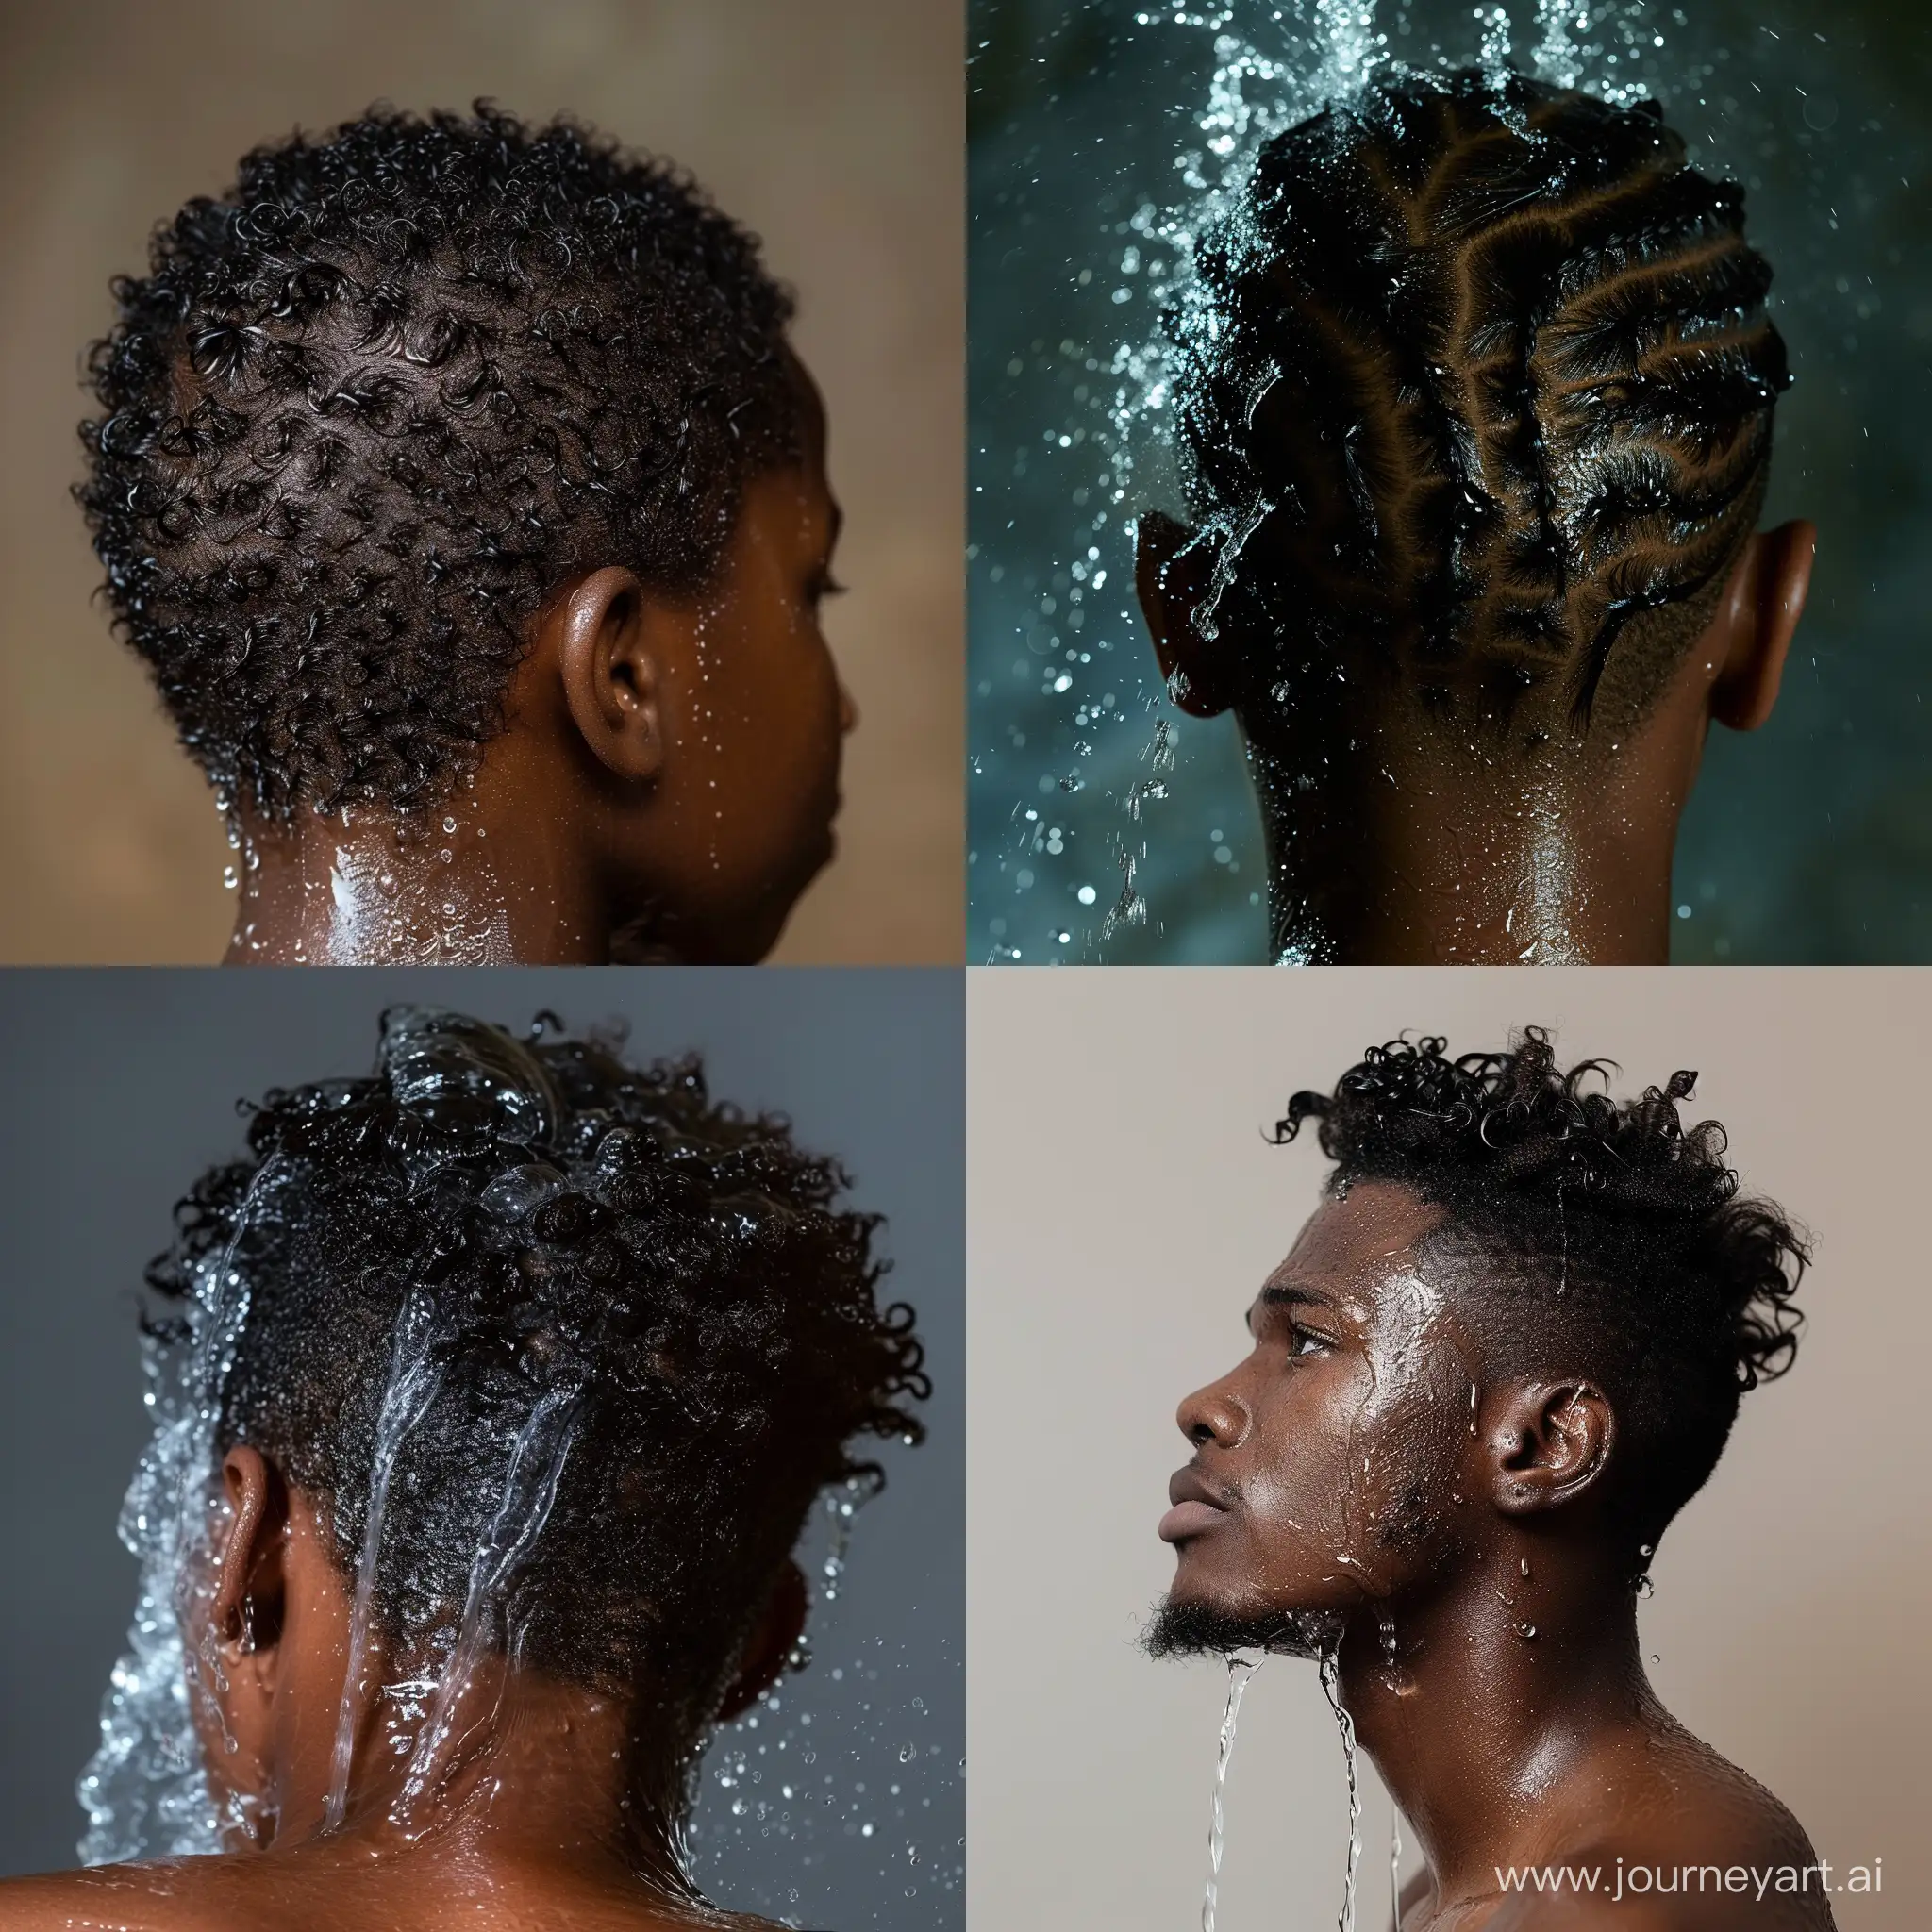 African-Father-and-Son-Bonding-Watering-Boys-Hair-in-a-Loving-Moment